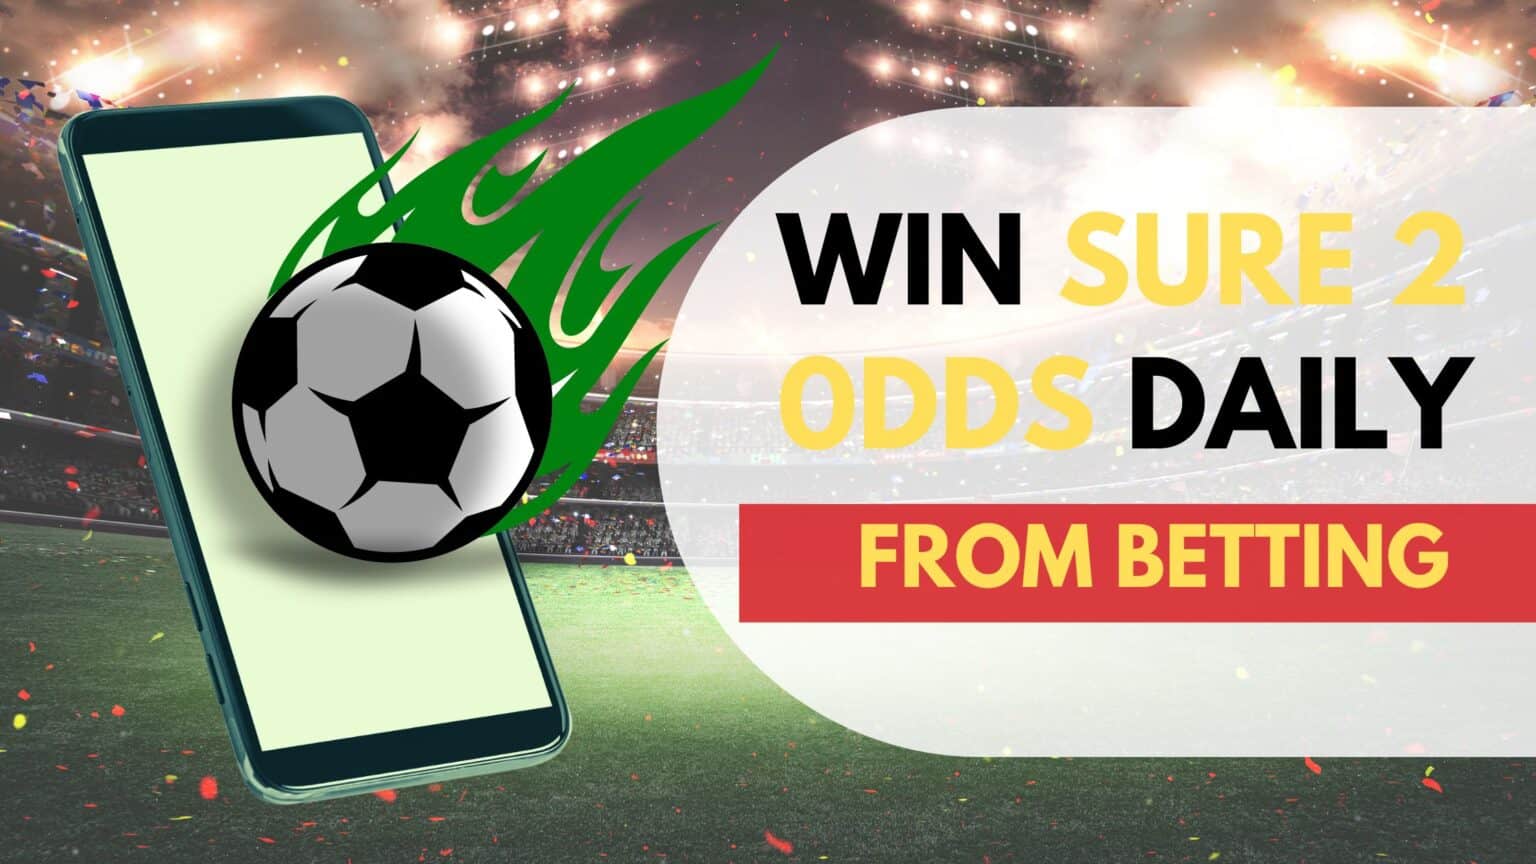 win-sure-2-odds-daily-from-betting-eagle-predict